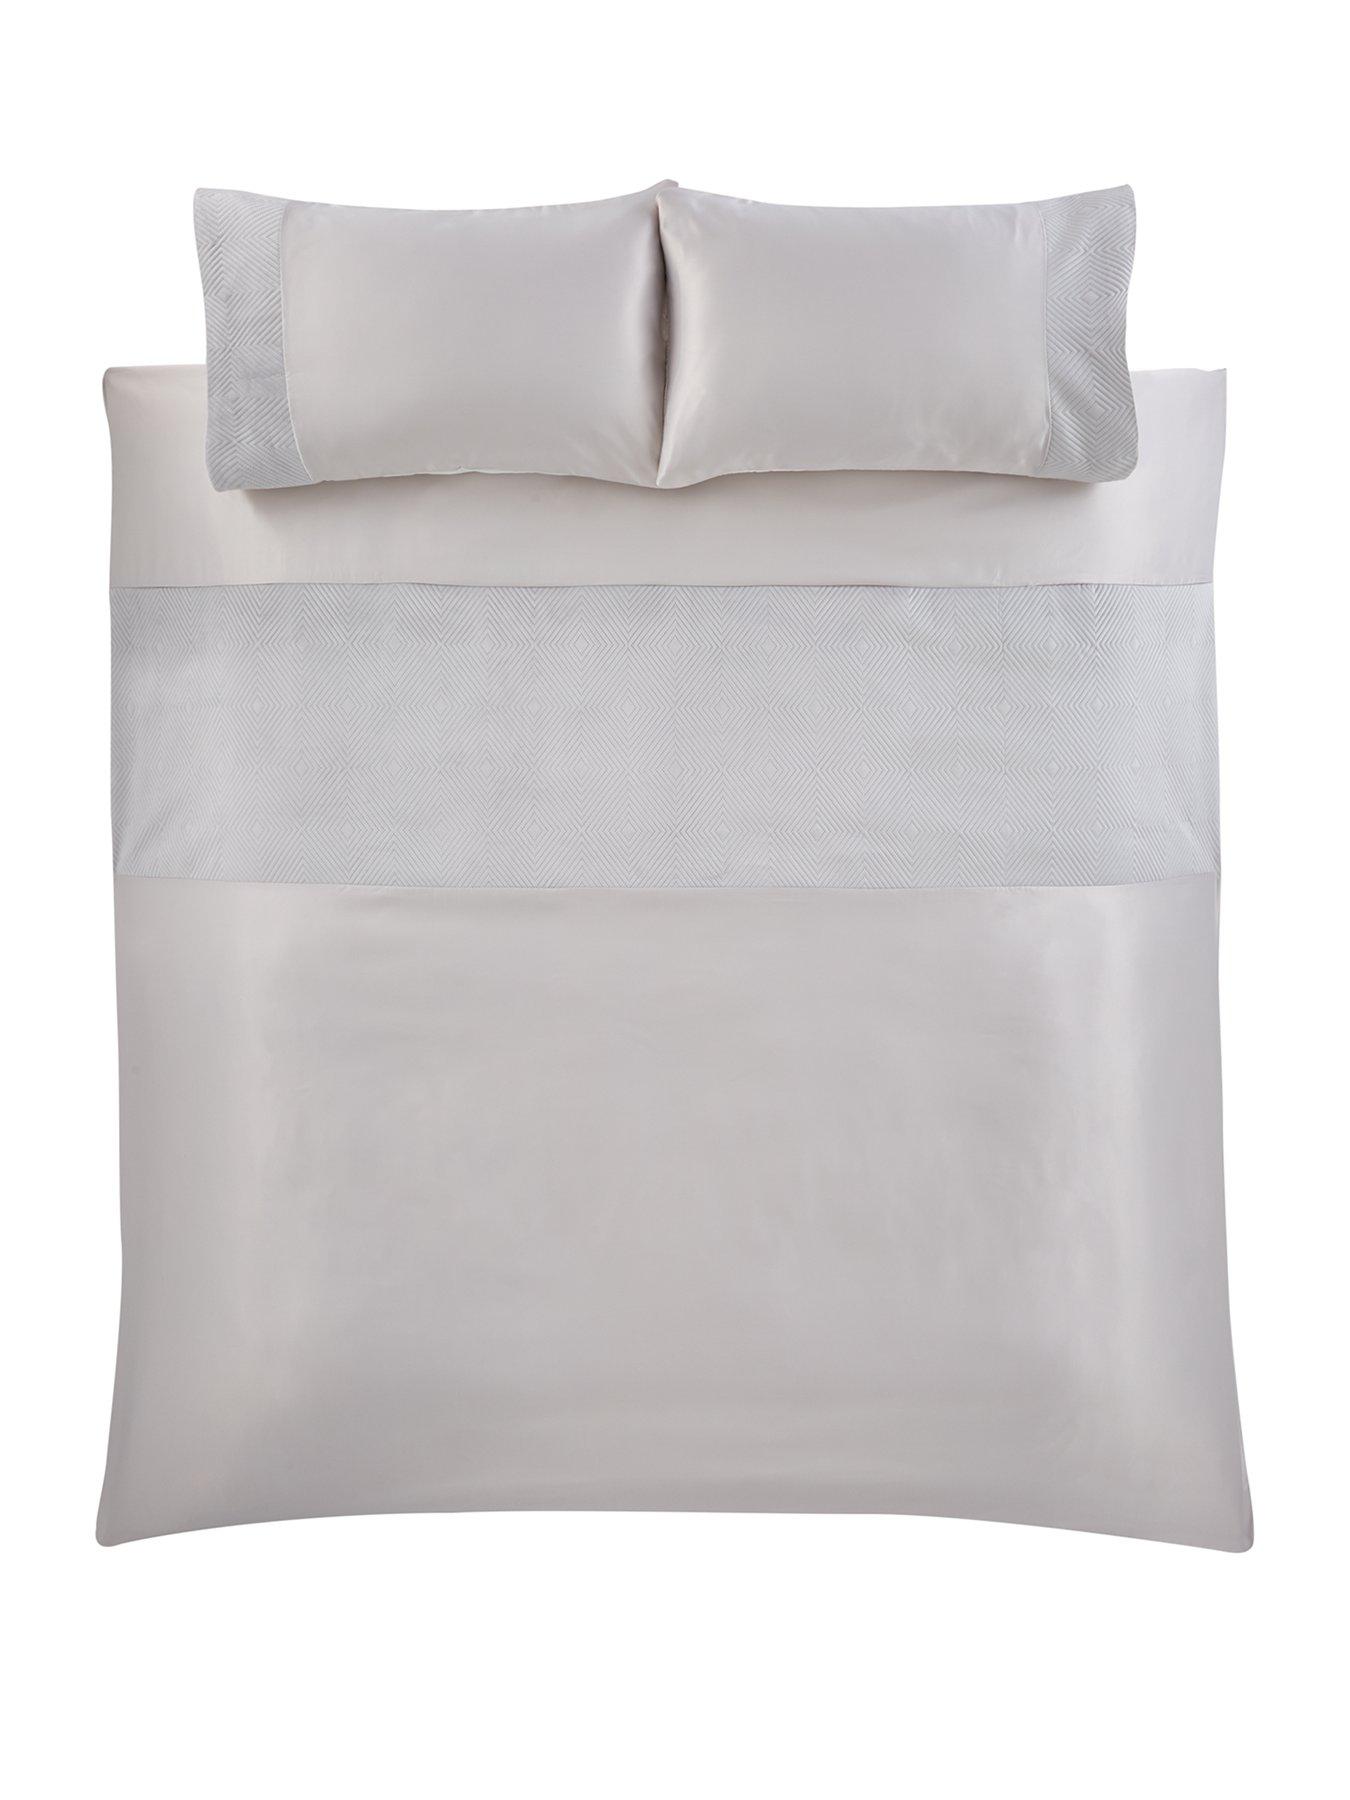 Bailey Pinsonic Duvet Cover Set - Silver | very.co.uk